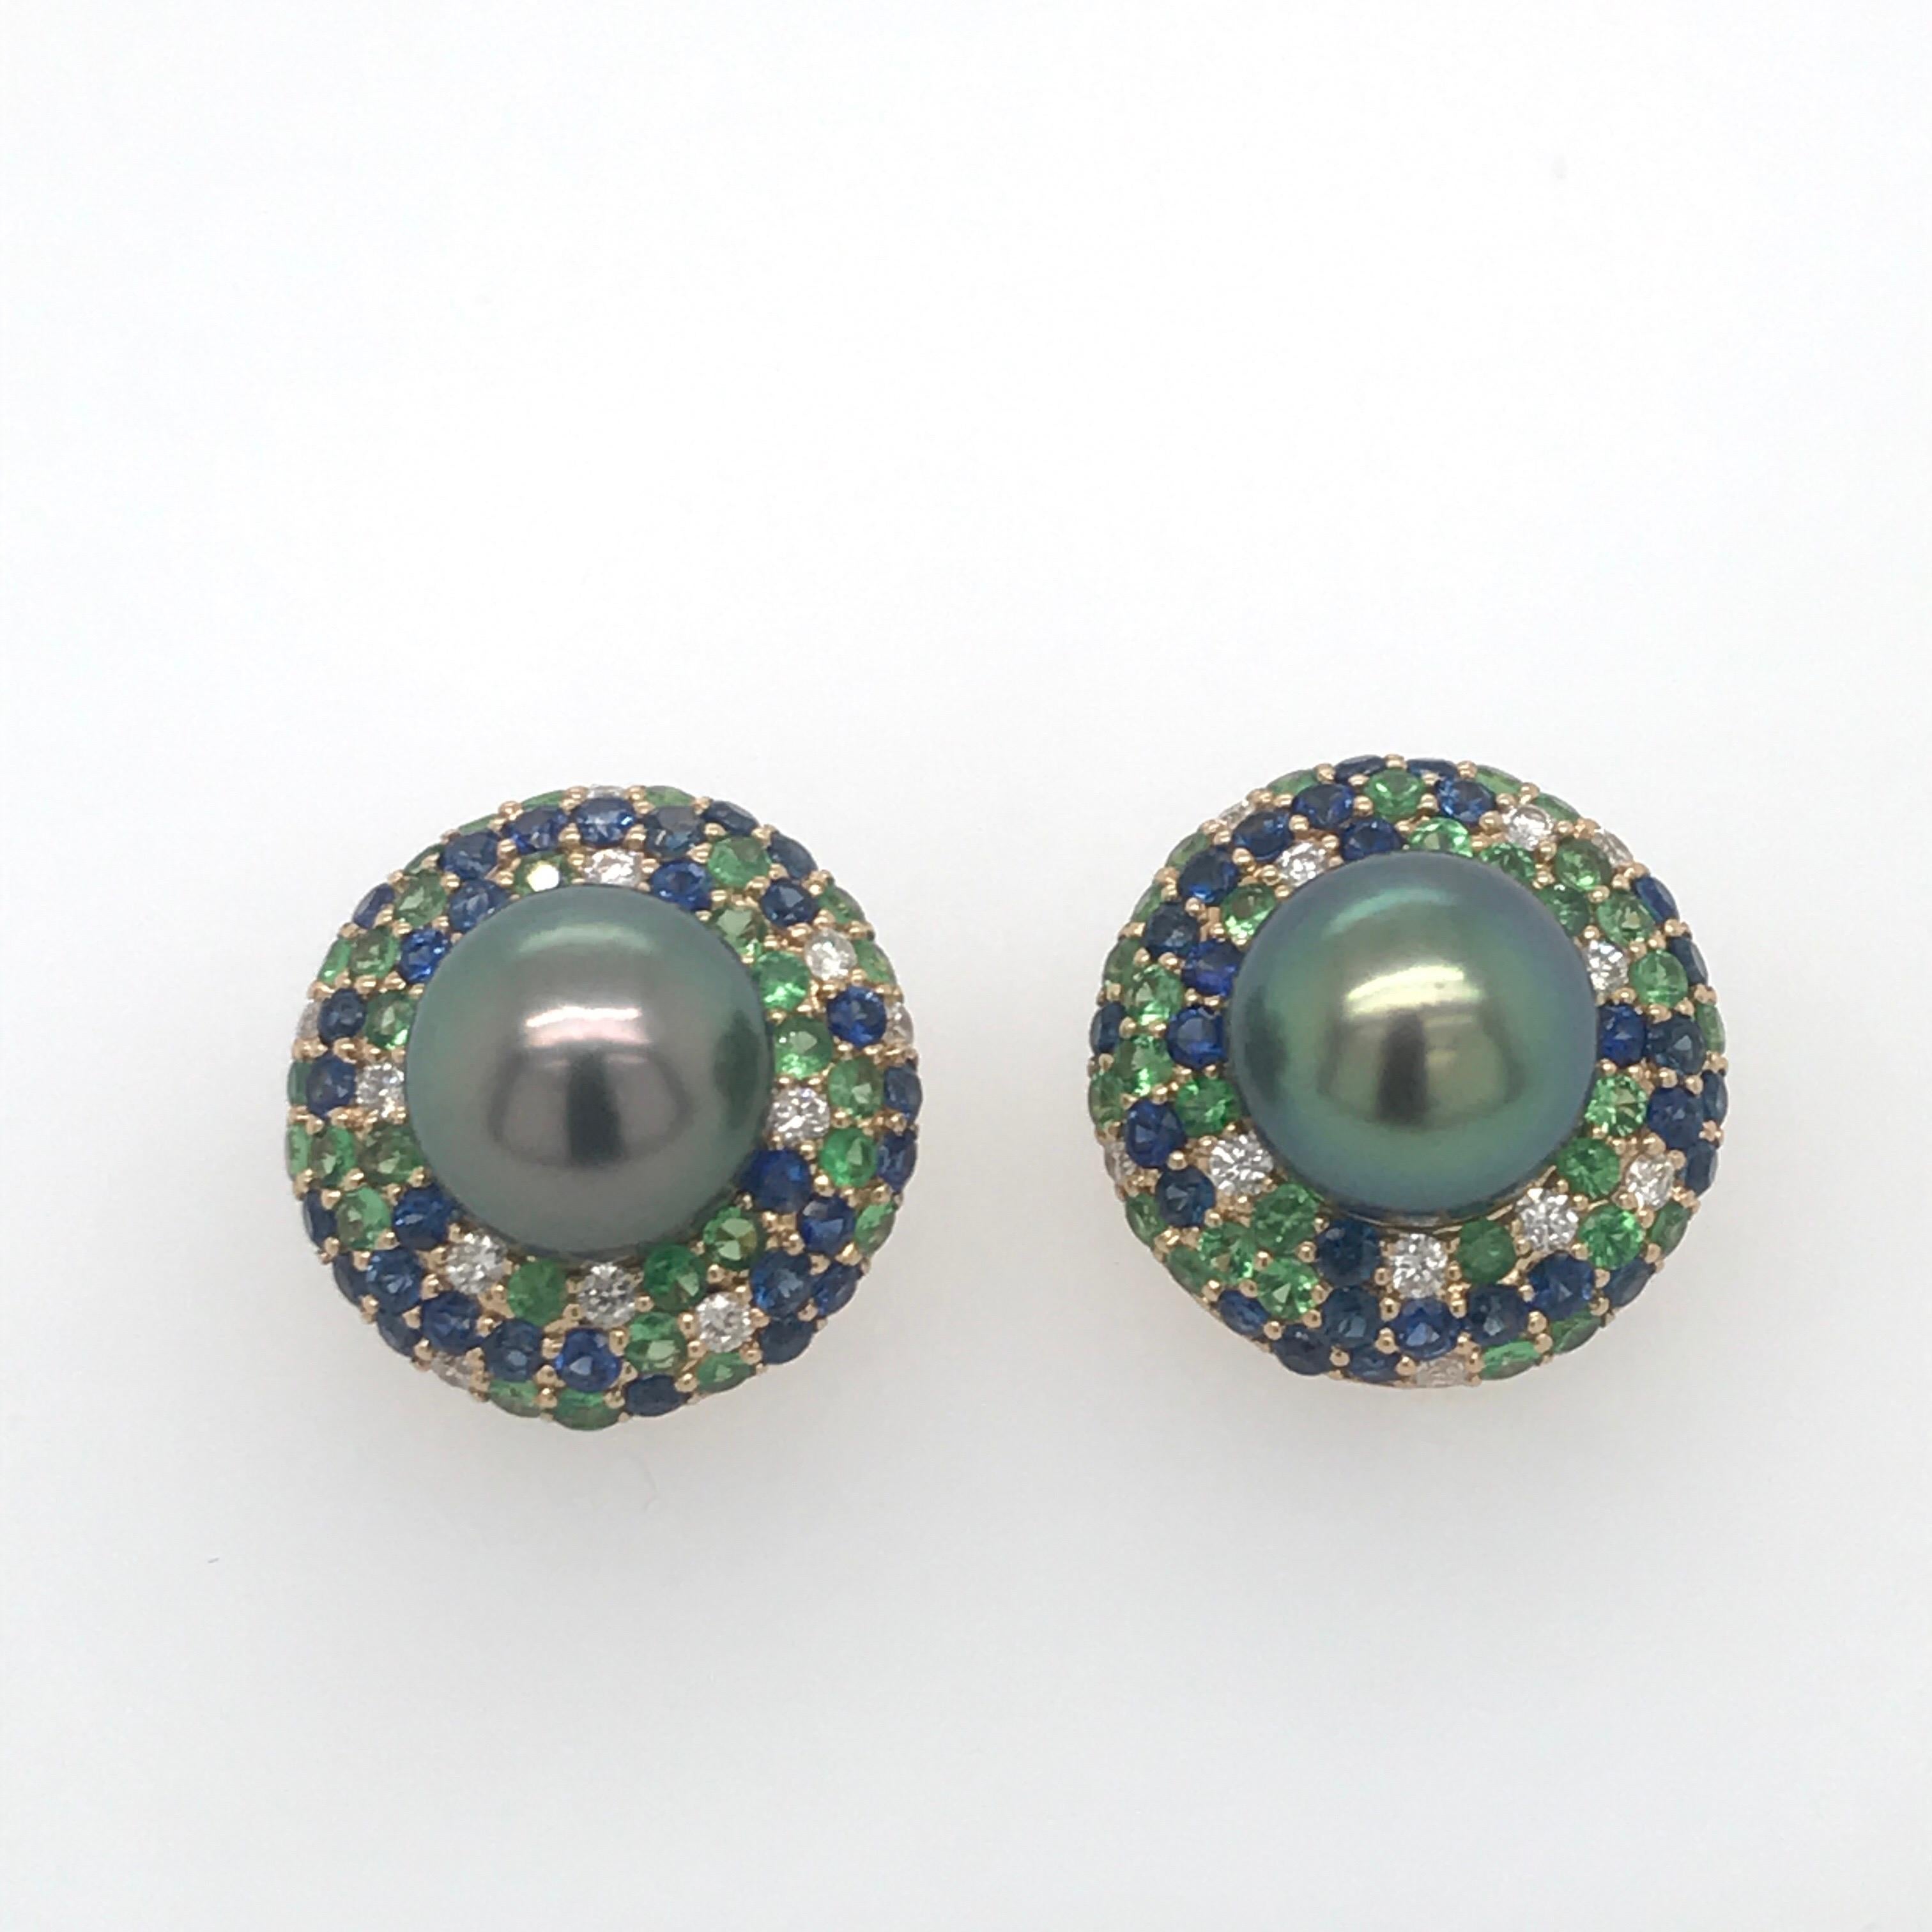 18K Yellow Gold earrings featuring two Tahitian pearls measuring 10-11 mm flanked with diamonds, 0.42 carats, blue sapphires, 1.95 carats and green tsavorite, 1.50 carats. 